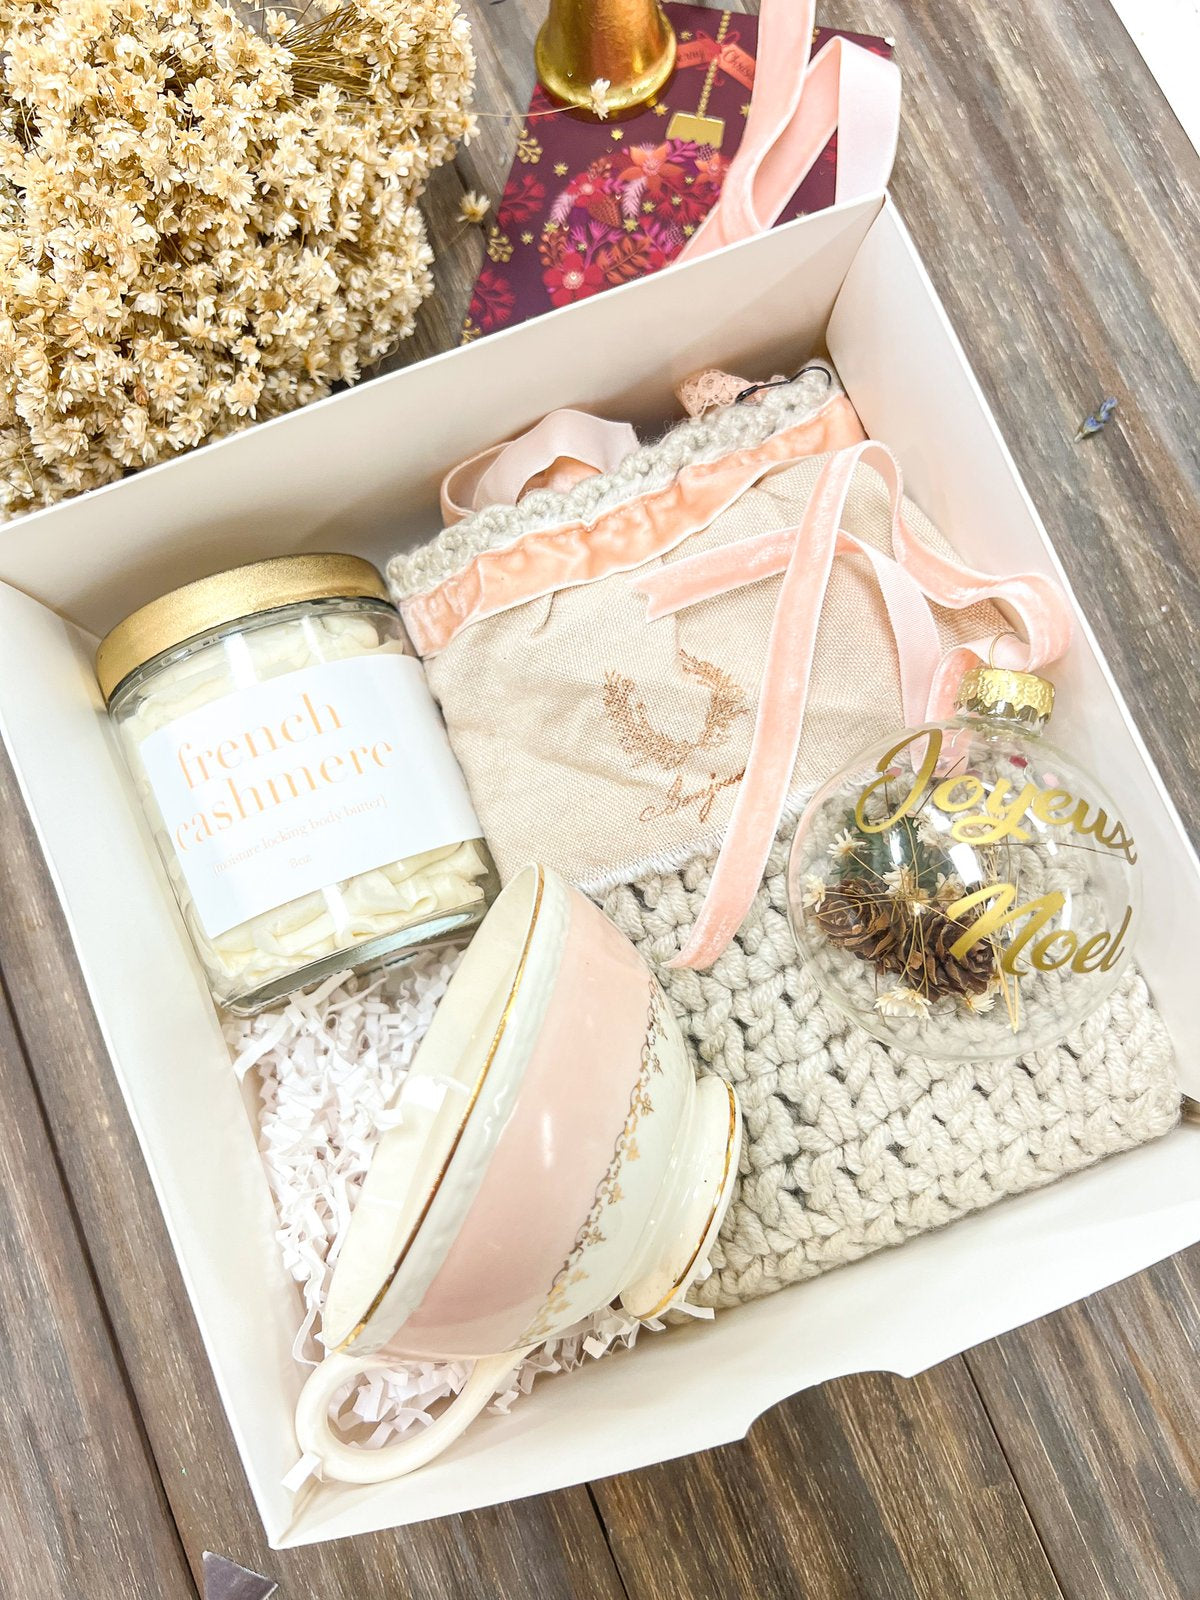 holidays/products/organic-body-butter-hand-poured-candle-hand-crafted-slipper-socks-and-ornament-gift-set